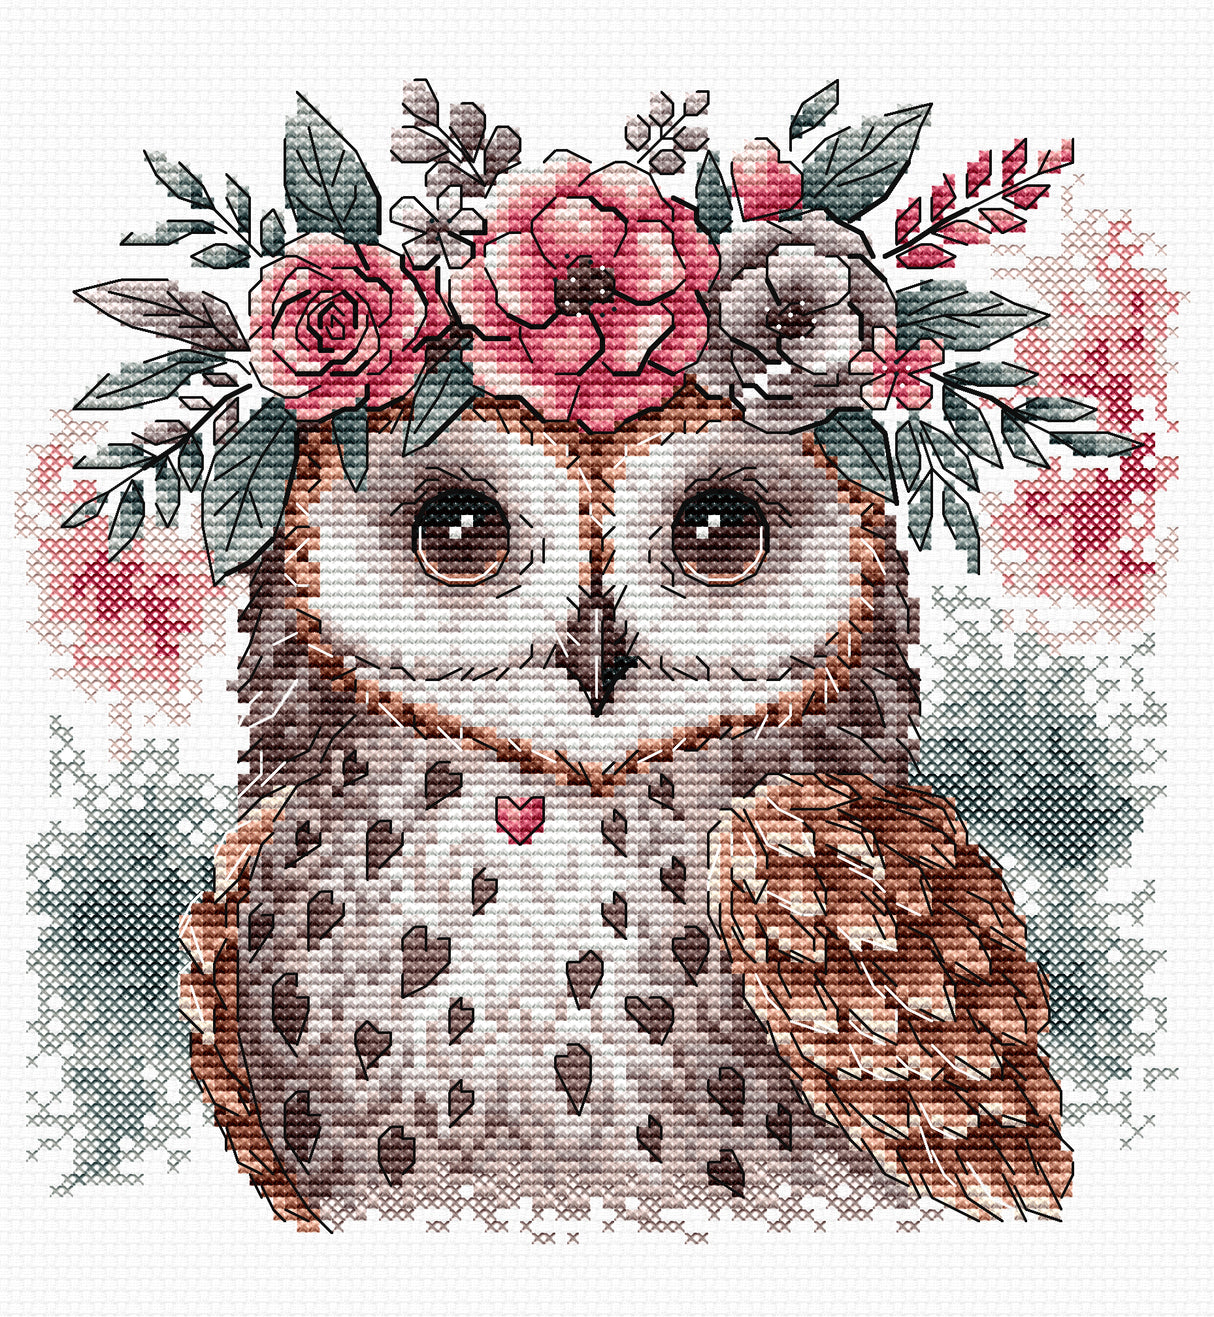 The Owl and his Natural Headband - Cross Stitch Kit Stitch and Art P028